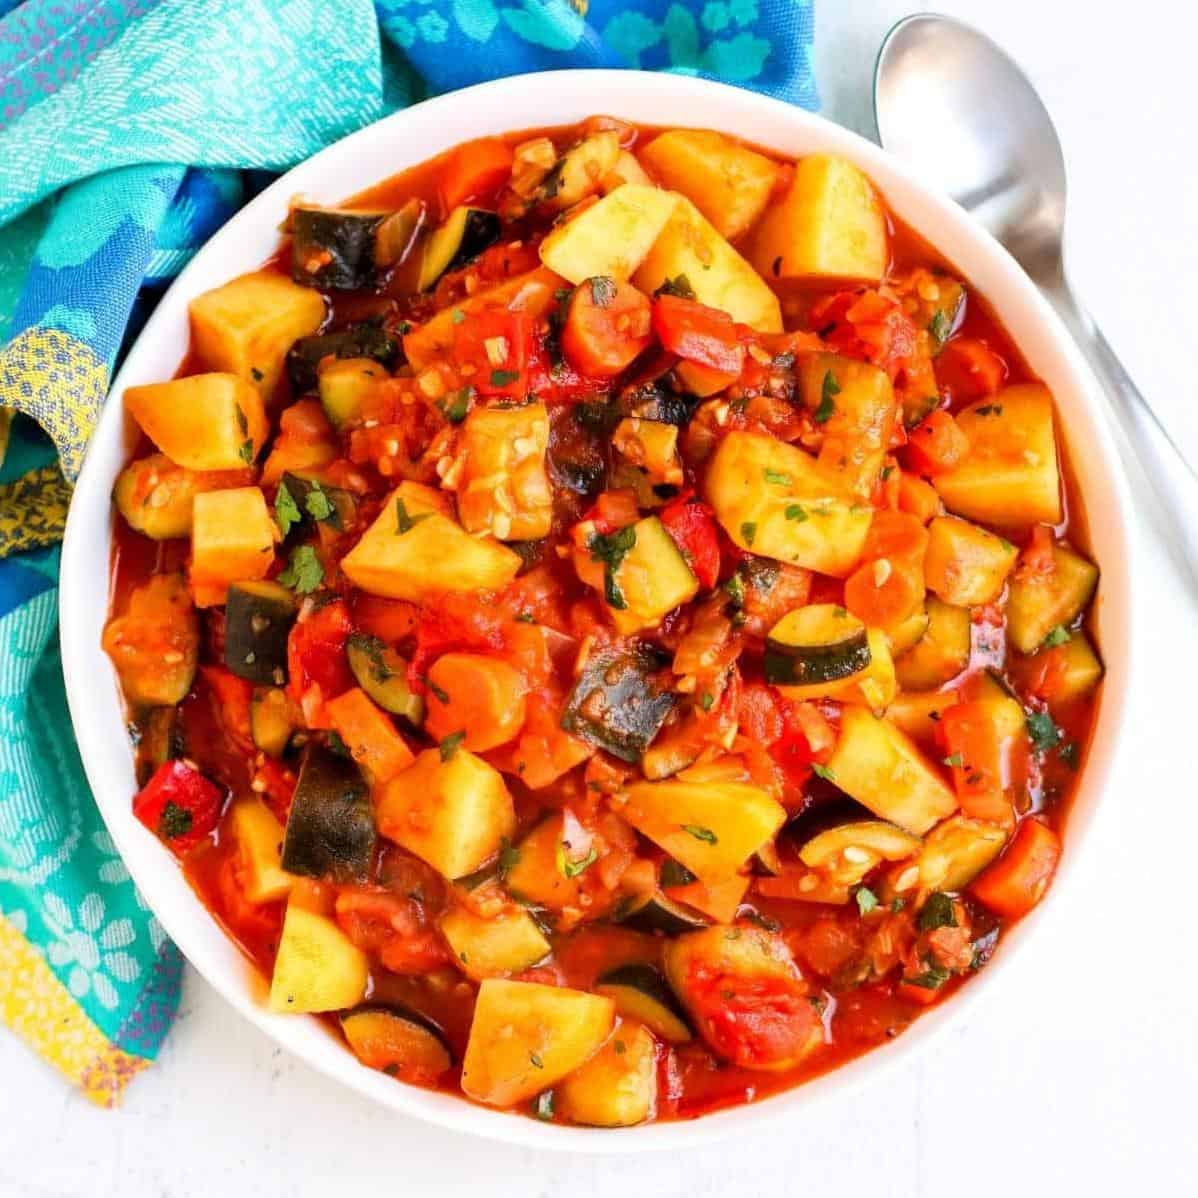  Who knew zucchini could be so versatile? Try this stew for a new take on a classic veggie.